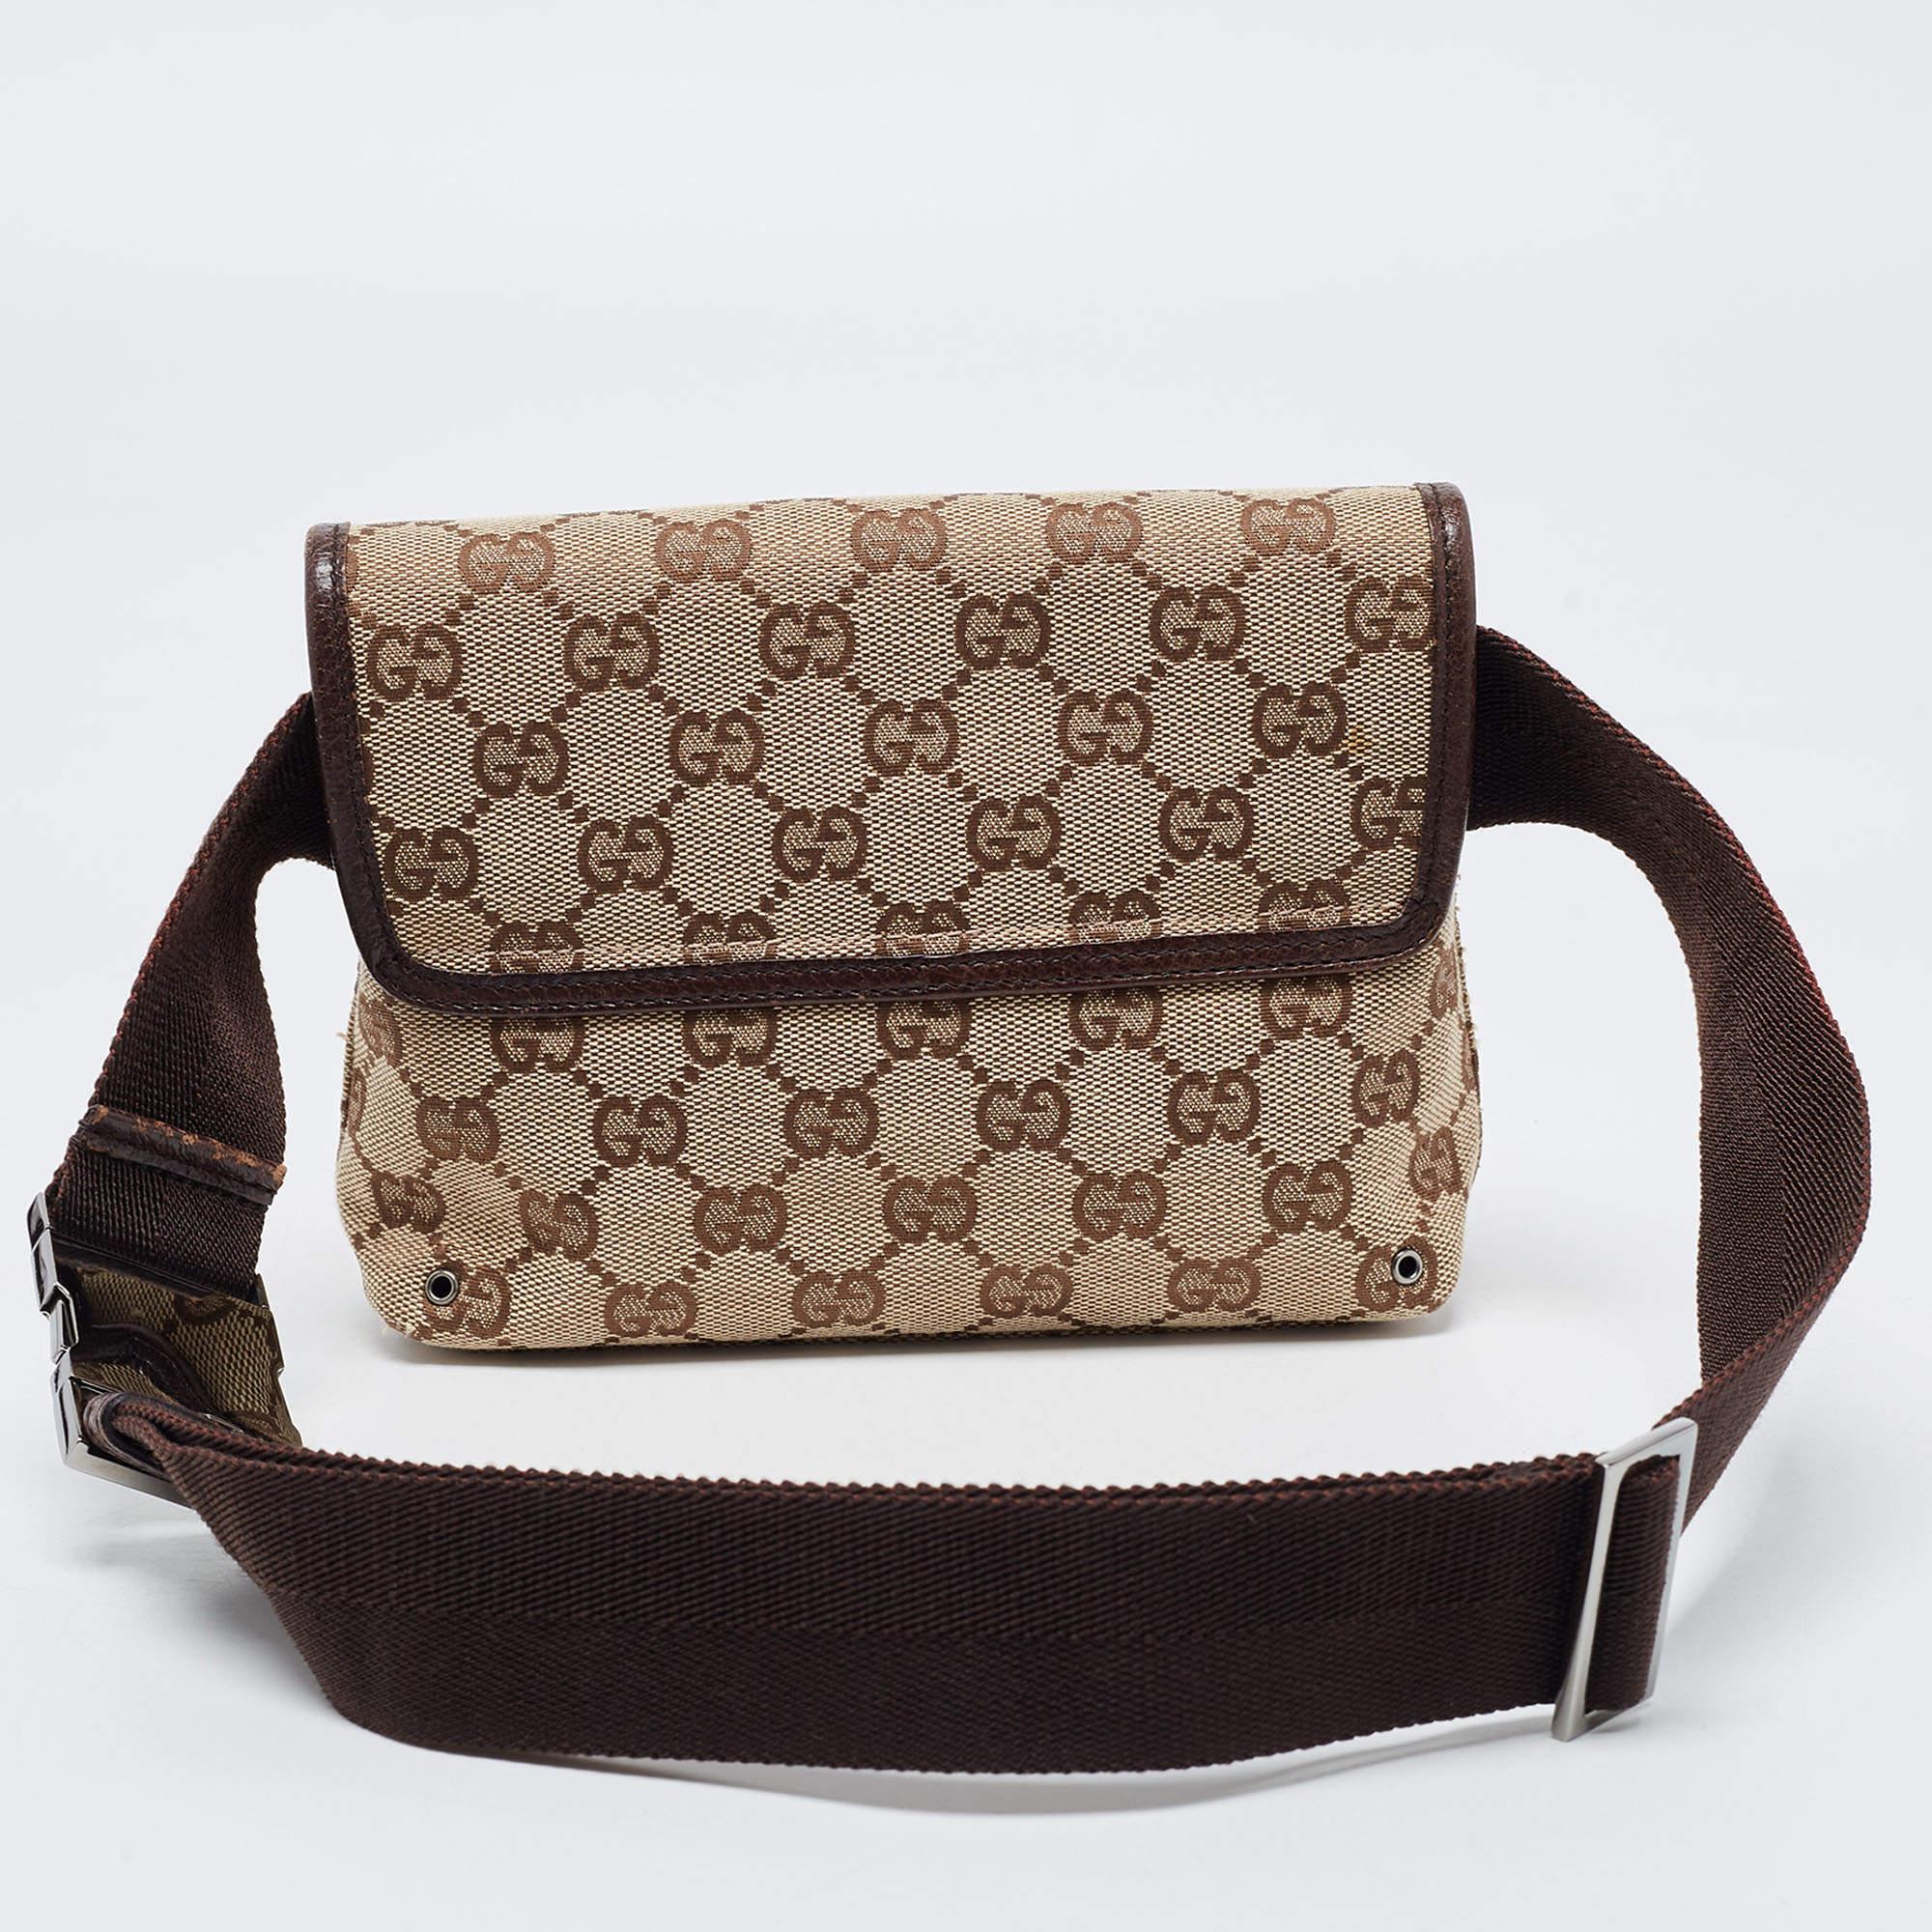 It's just as important to have the right accessories, as it is to have the right outfit. This Gucci creation is just what you need to do that. This beige piece, made with GG canvas and brown leather will seamlessly complement your uptown and